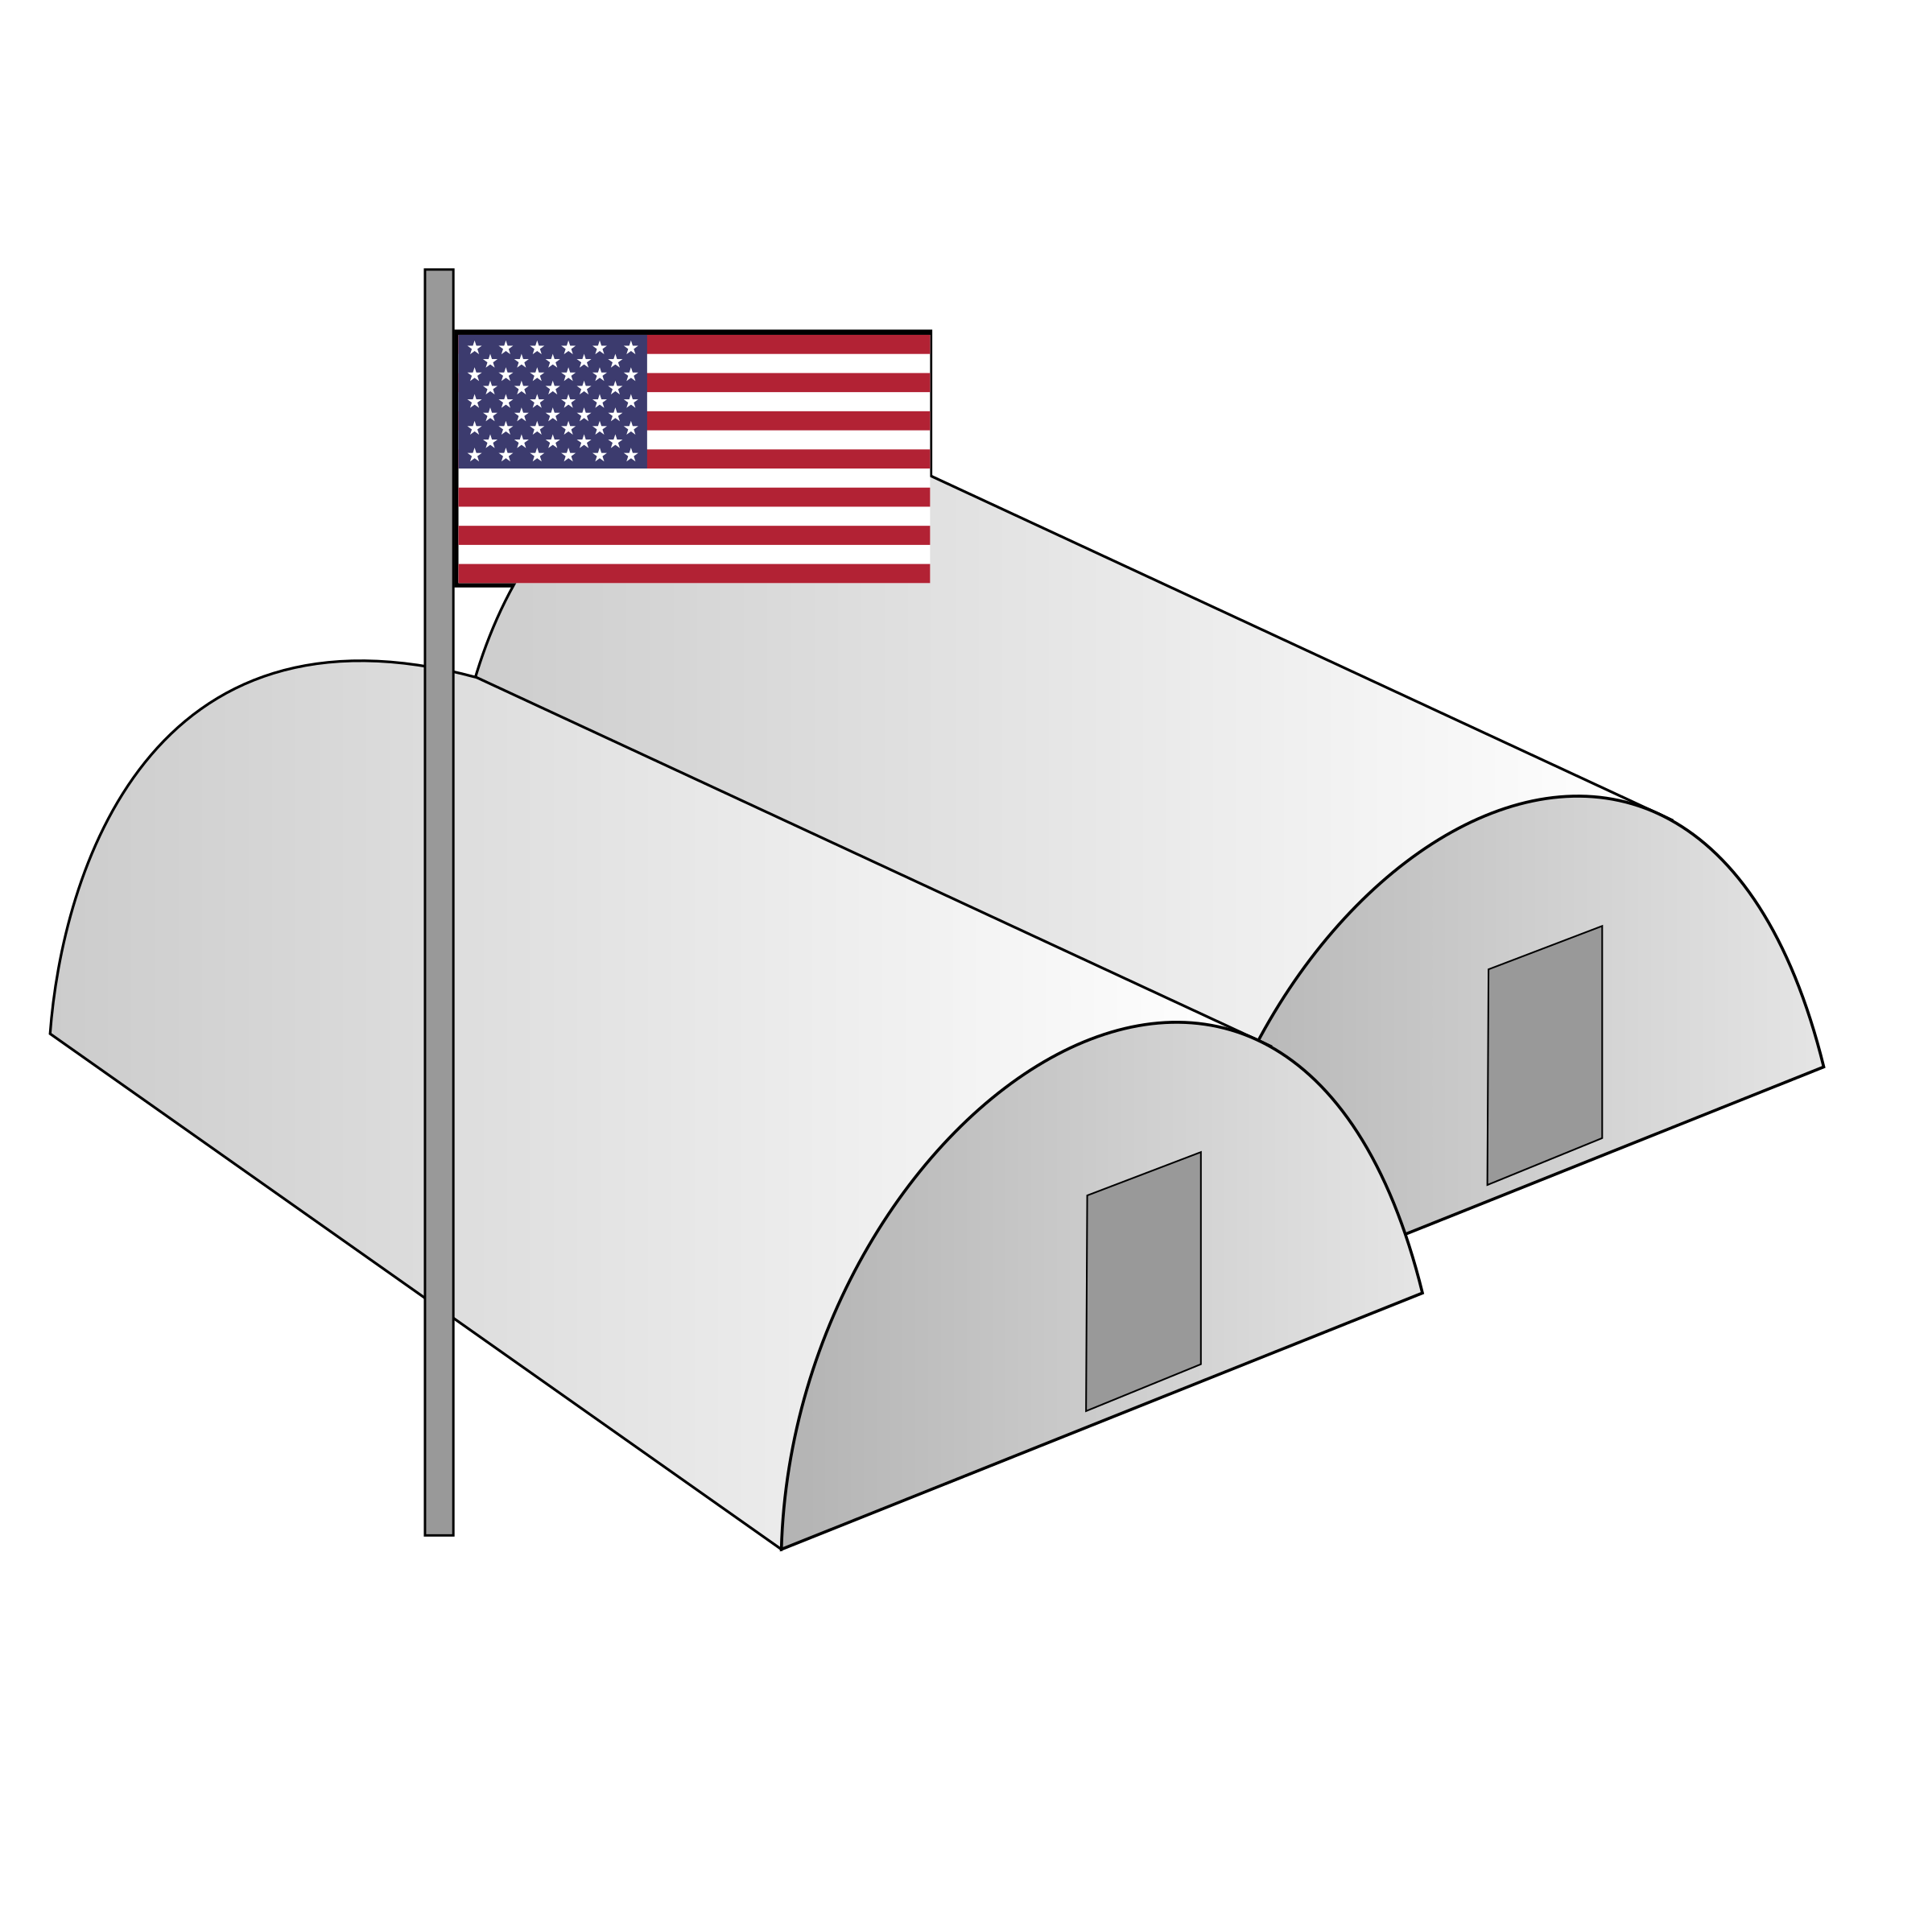 Military camp clipart - Clipground